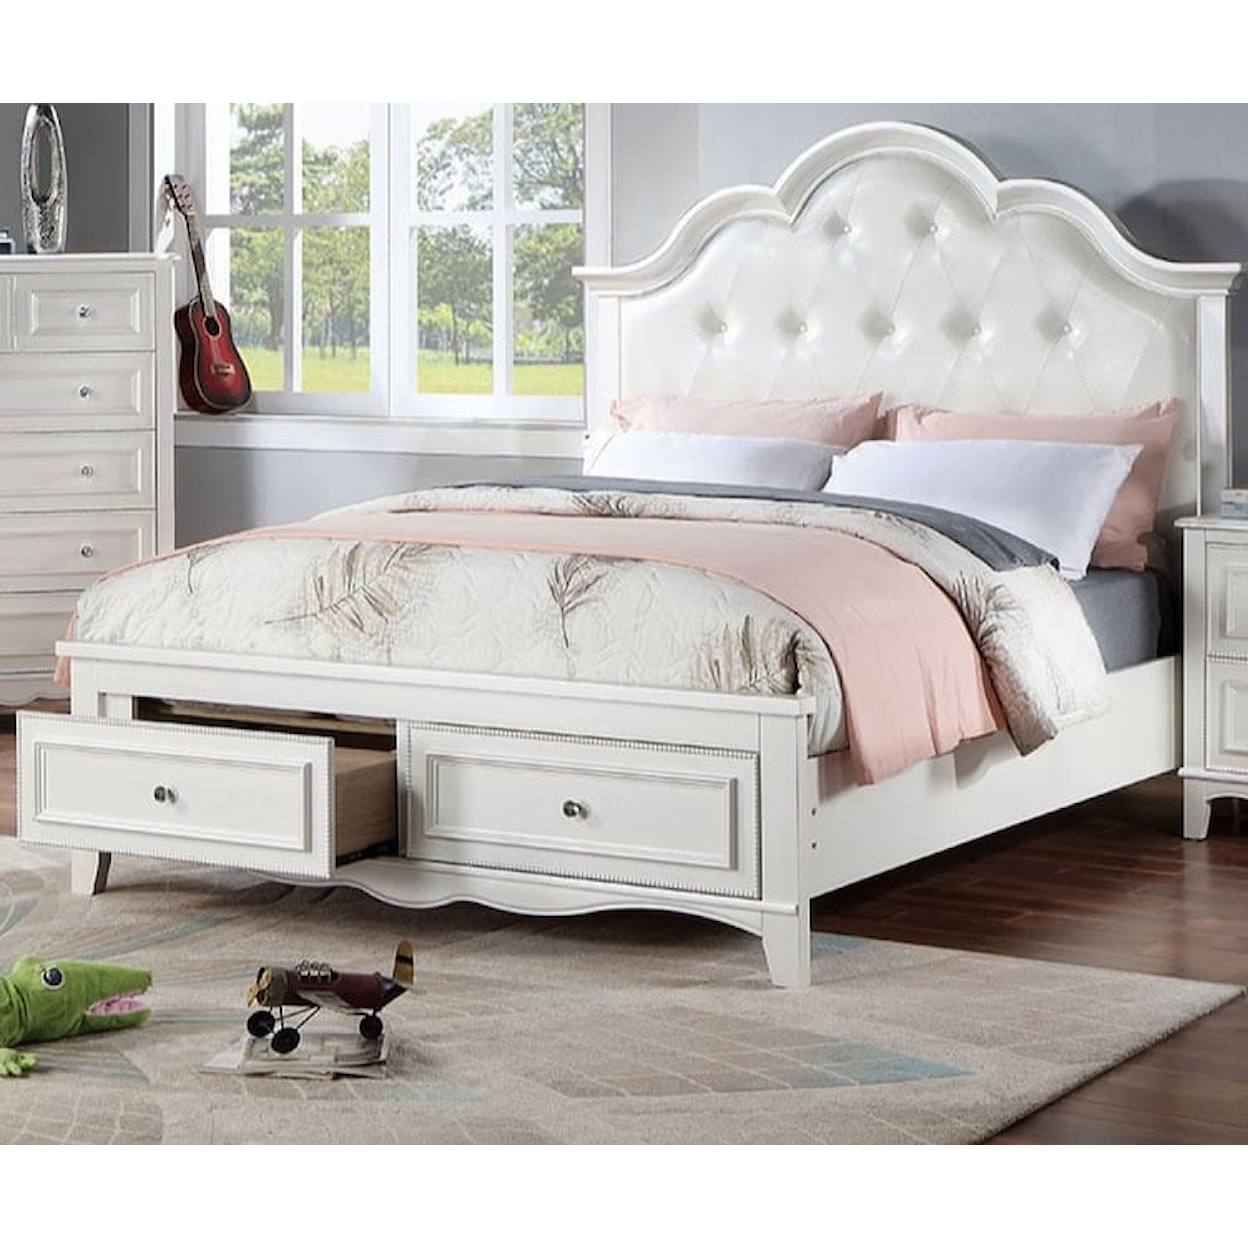 Furniture of America - FOA CADENCE Upholstered Twin Bed with Footboard Storage